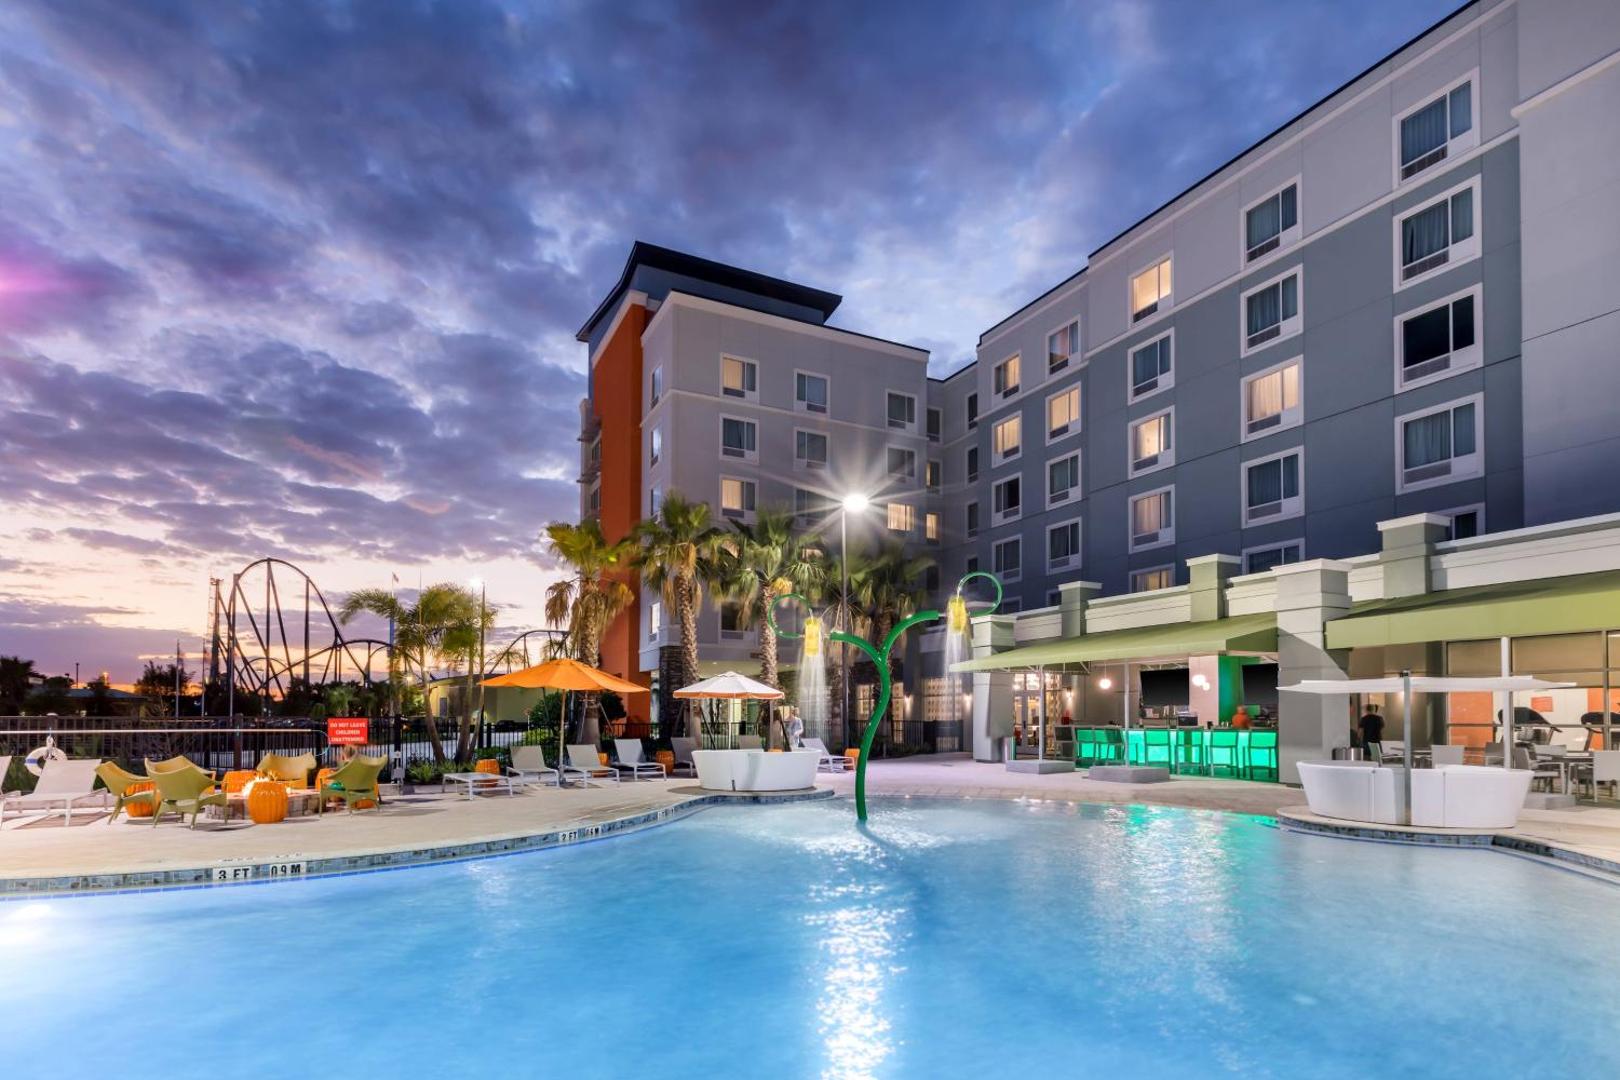 TownePlace Suites Orlando at SeaWorld